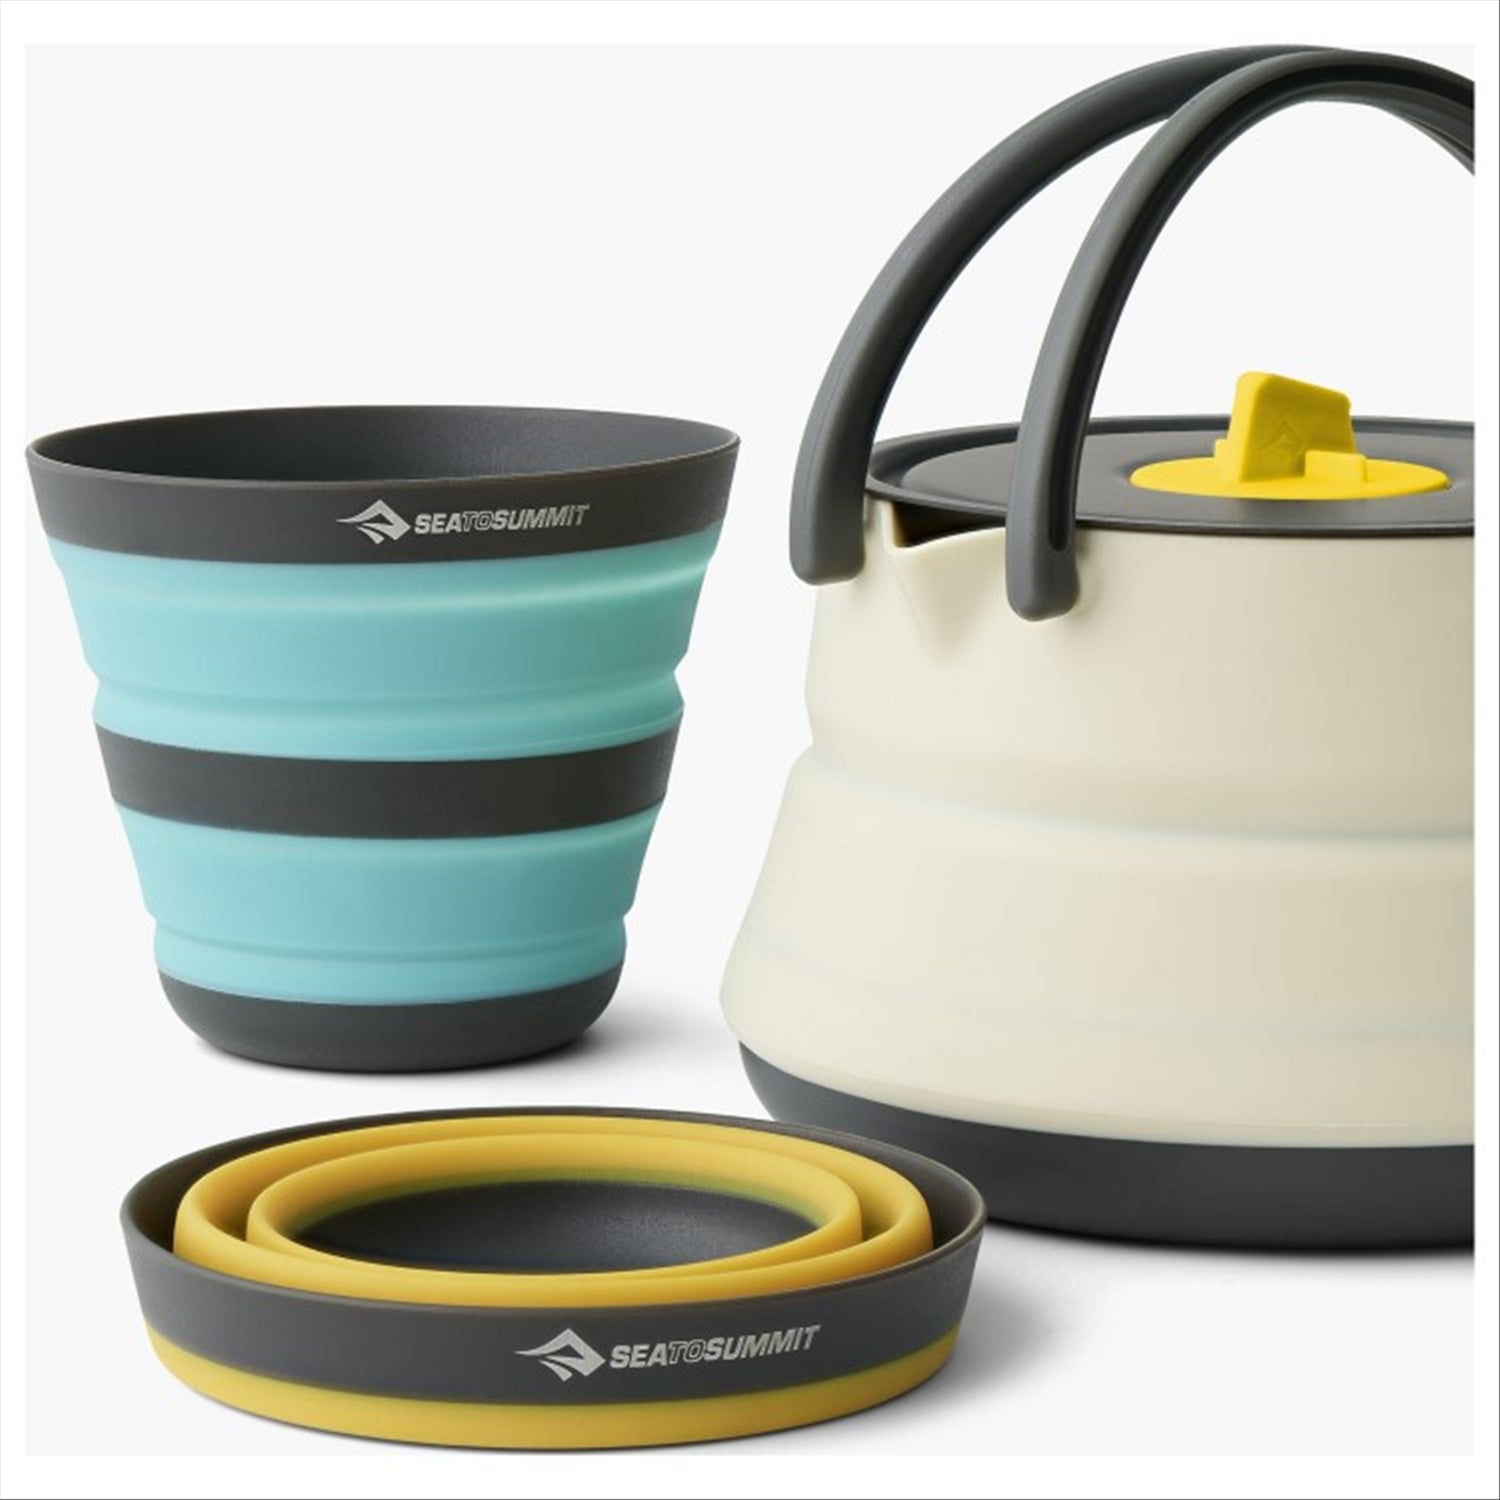 Sea to Summit Sea To Summit Frontier Collapsible Kettle Cook Set - 2P, 3 Piece